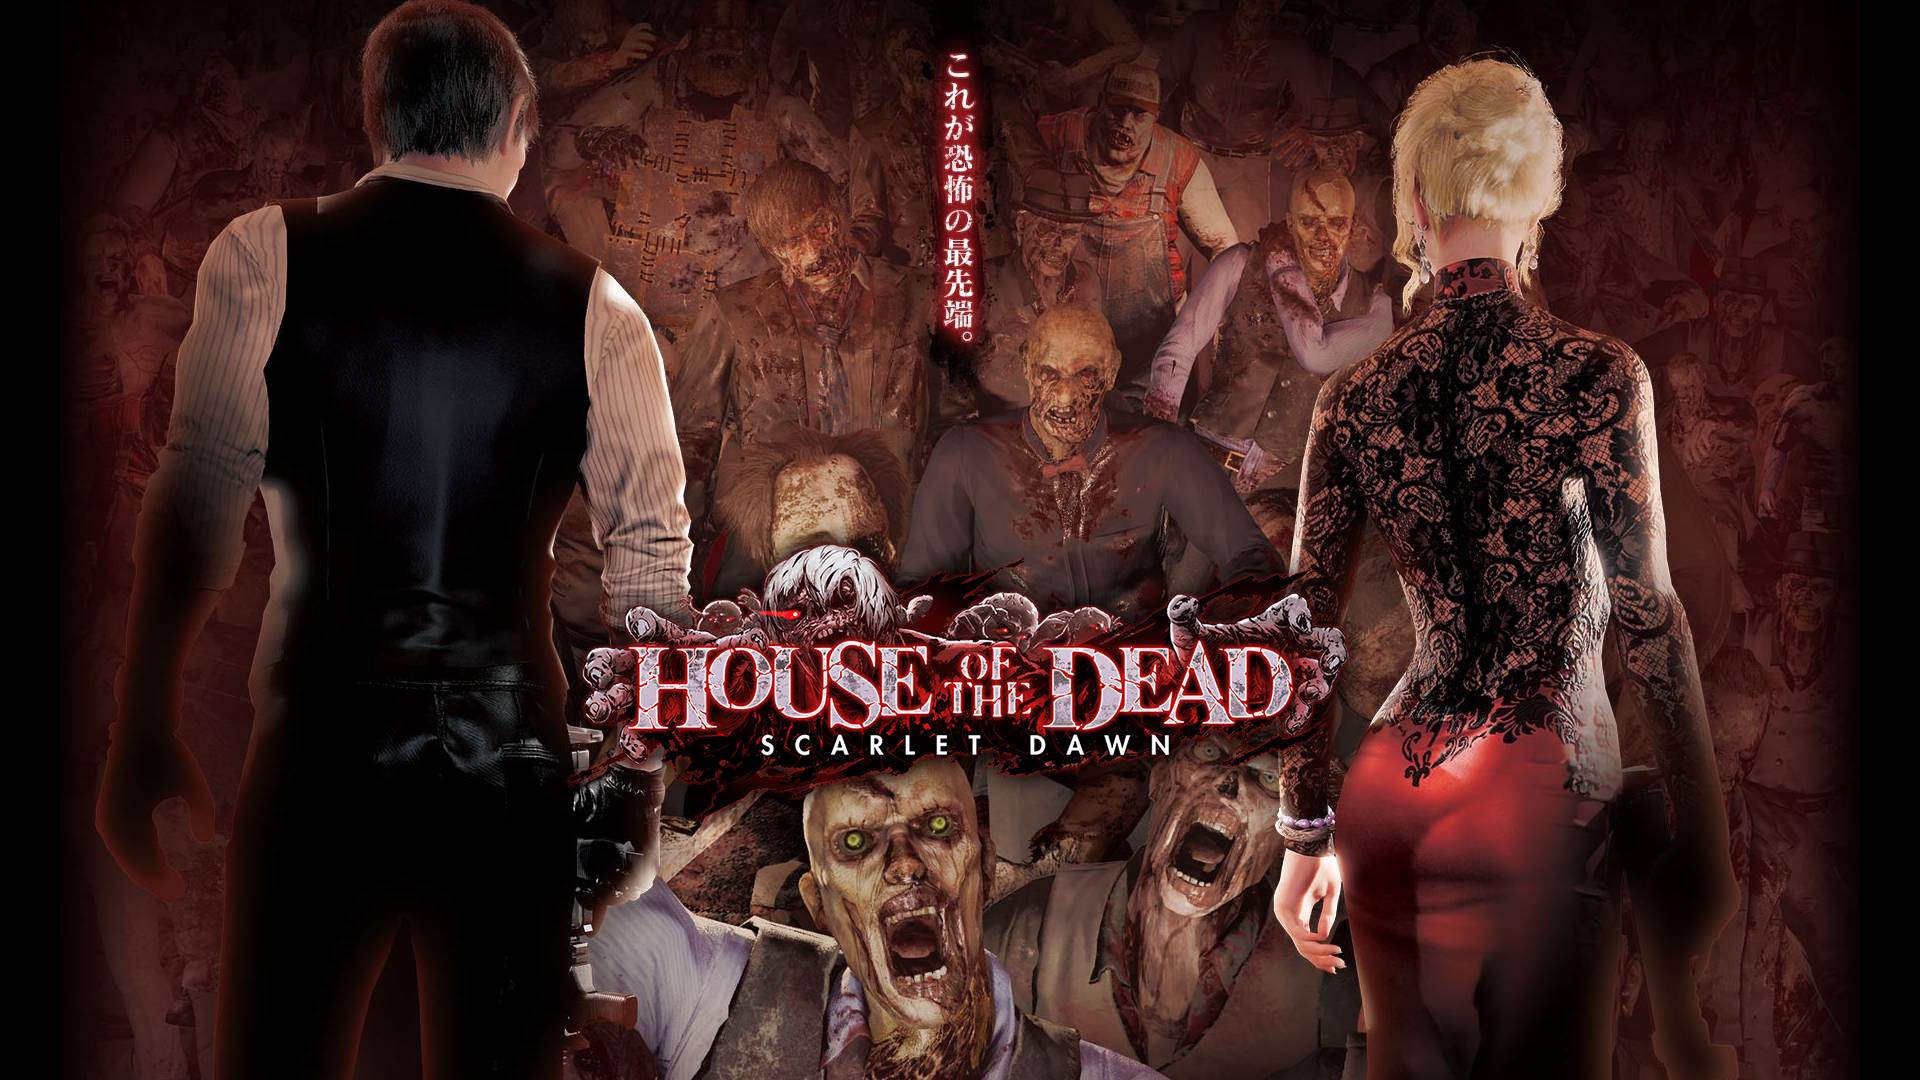 House of the dead: Scarlet Dawn